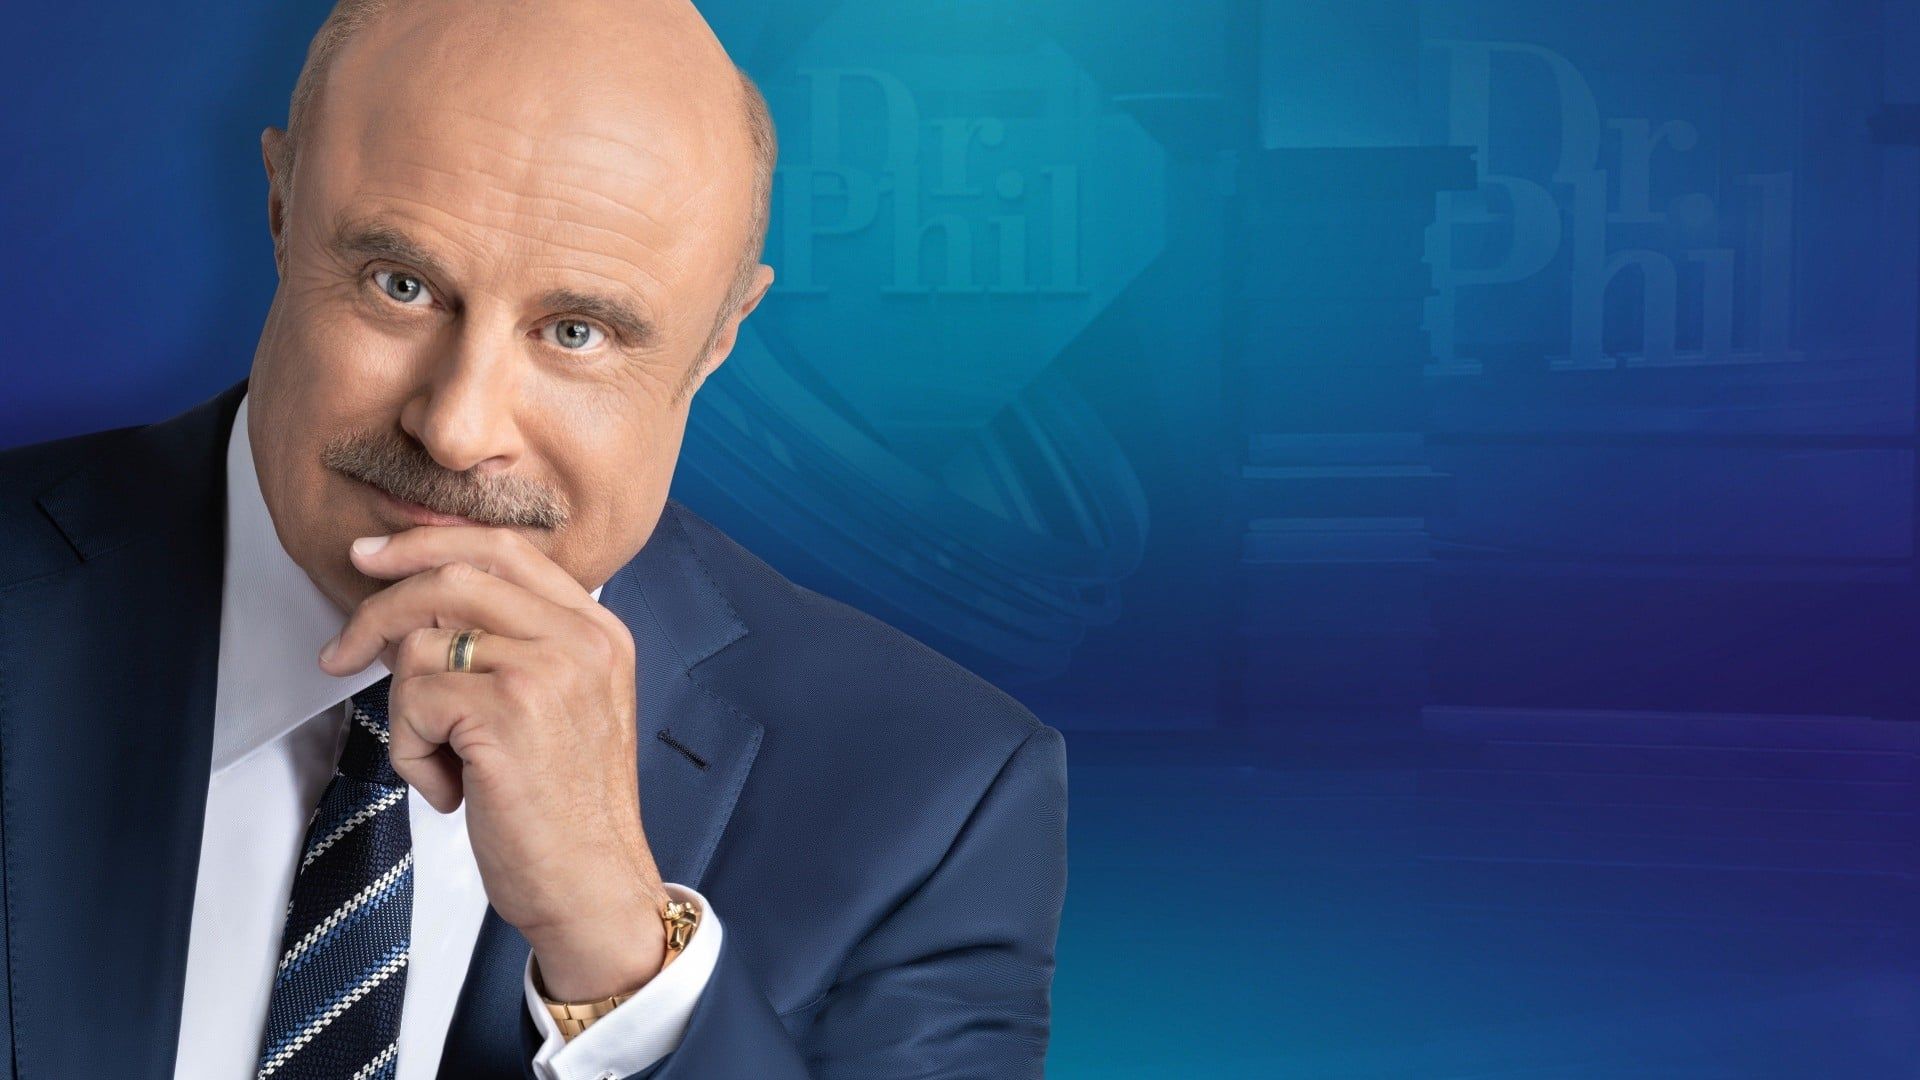 Dr. Phil background